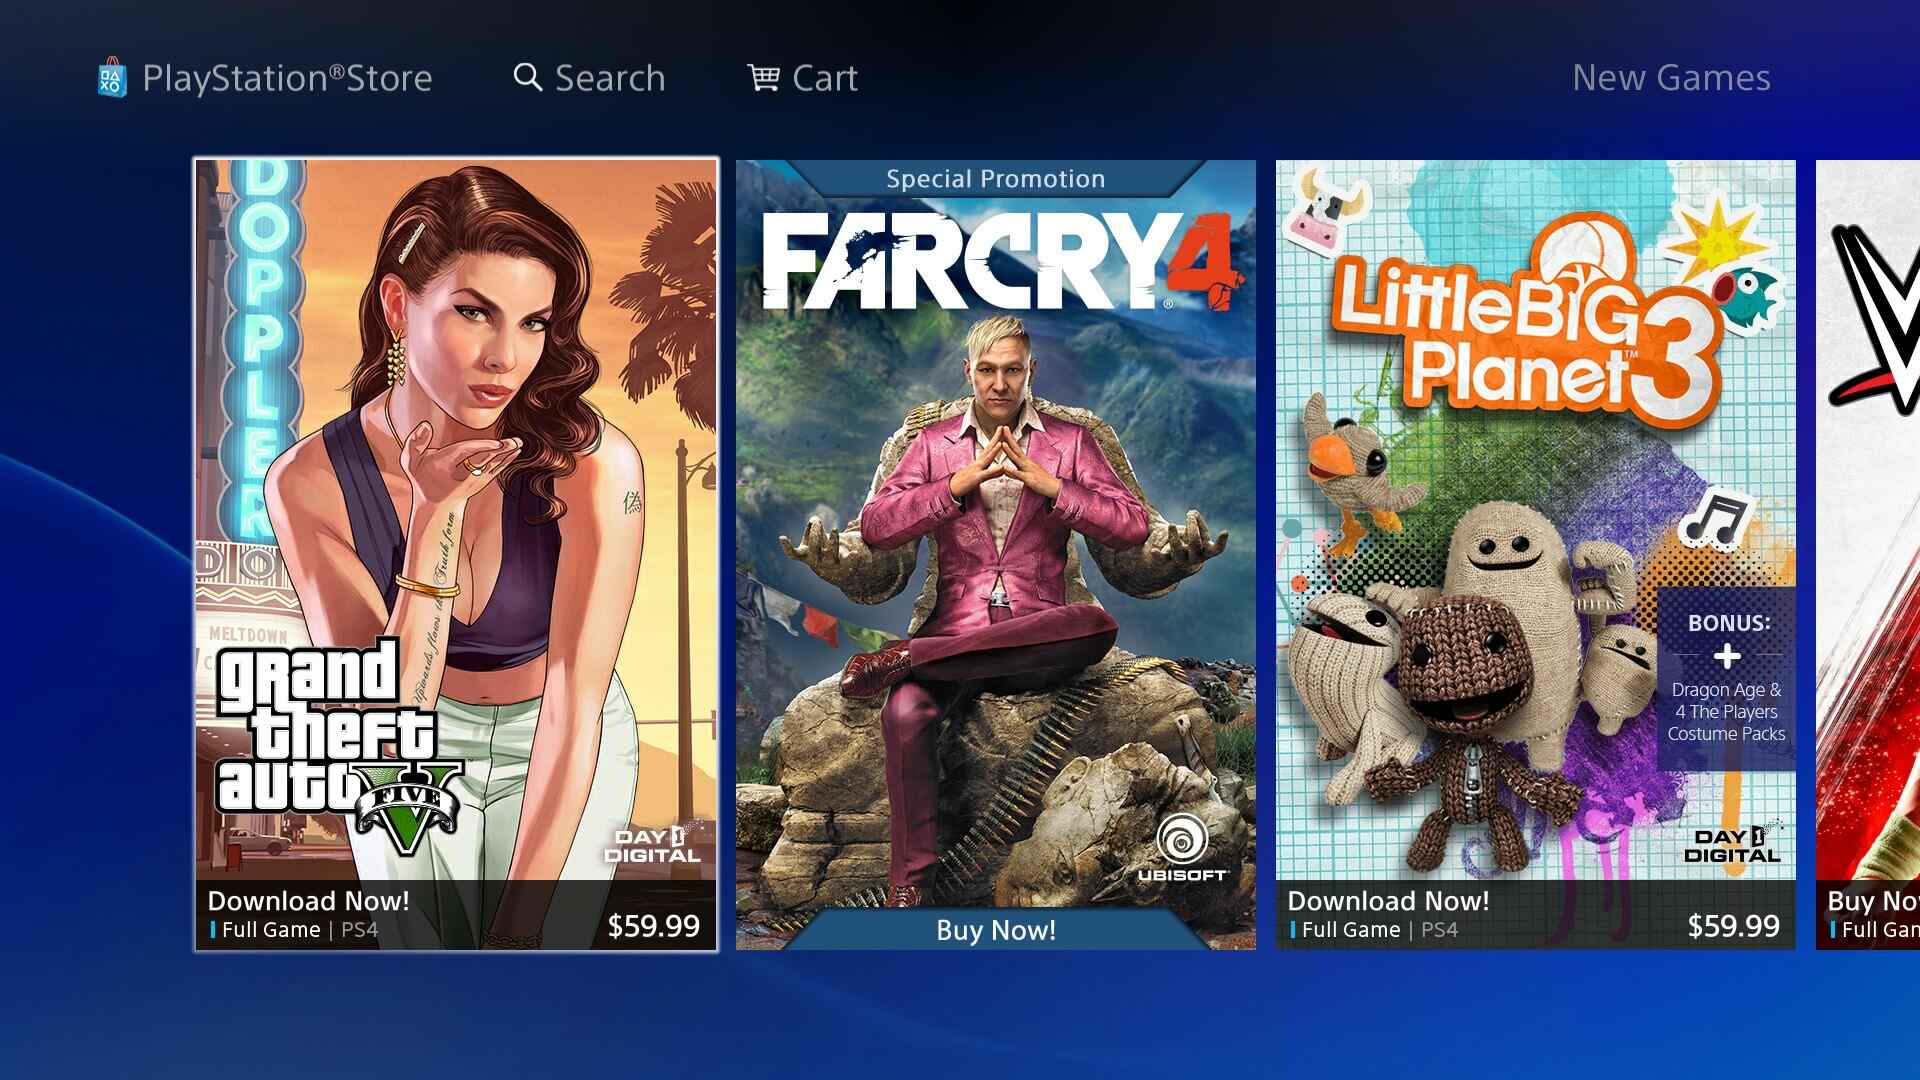 How to Download Games on Your PS4